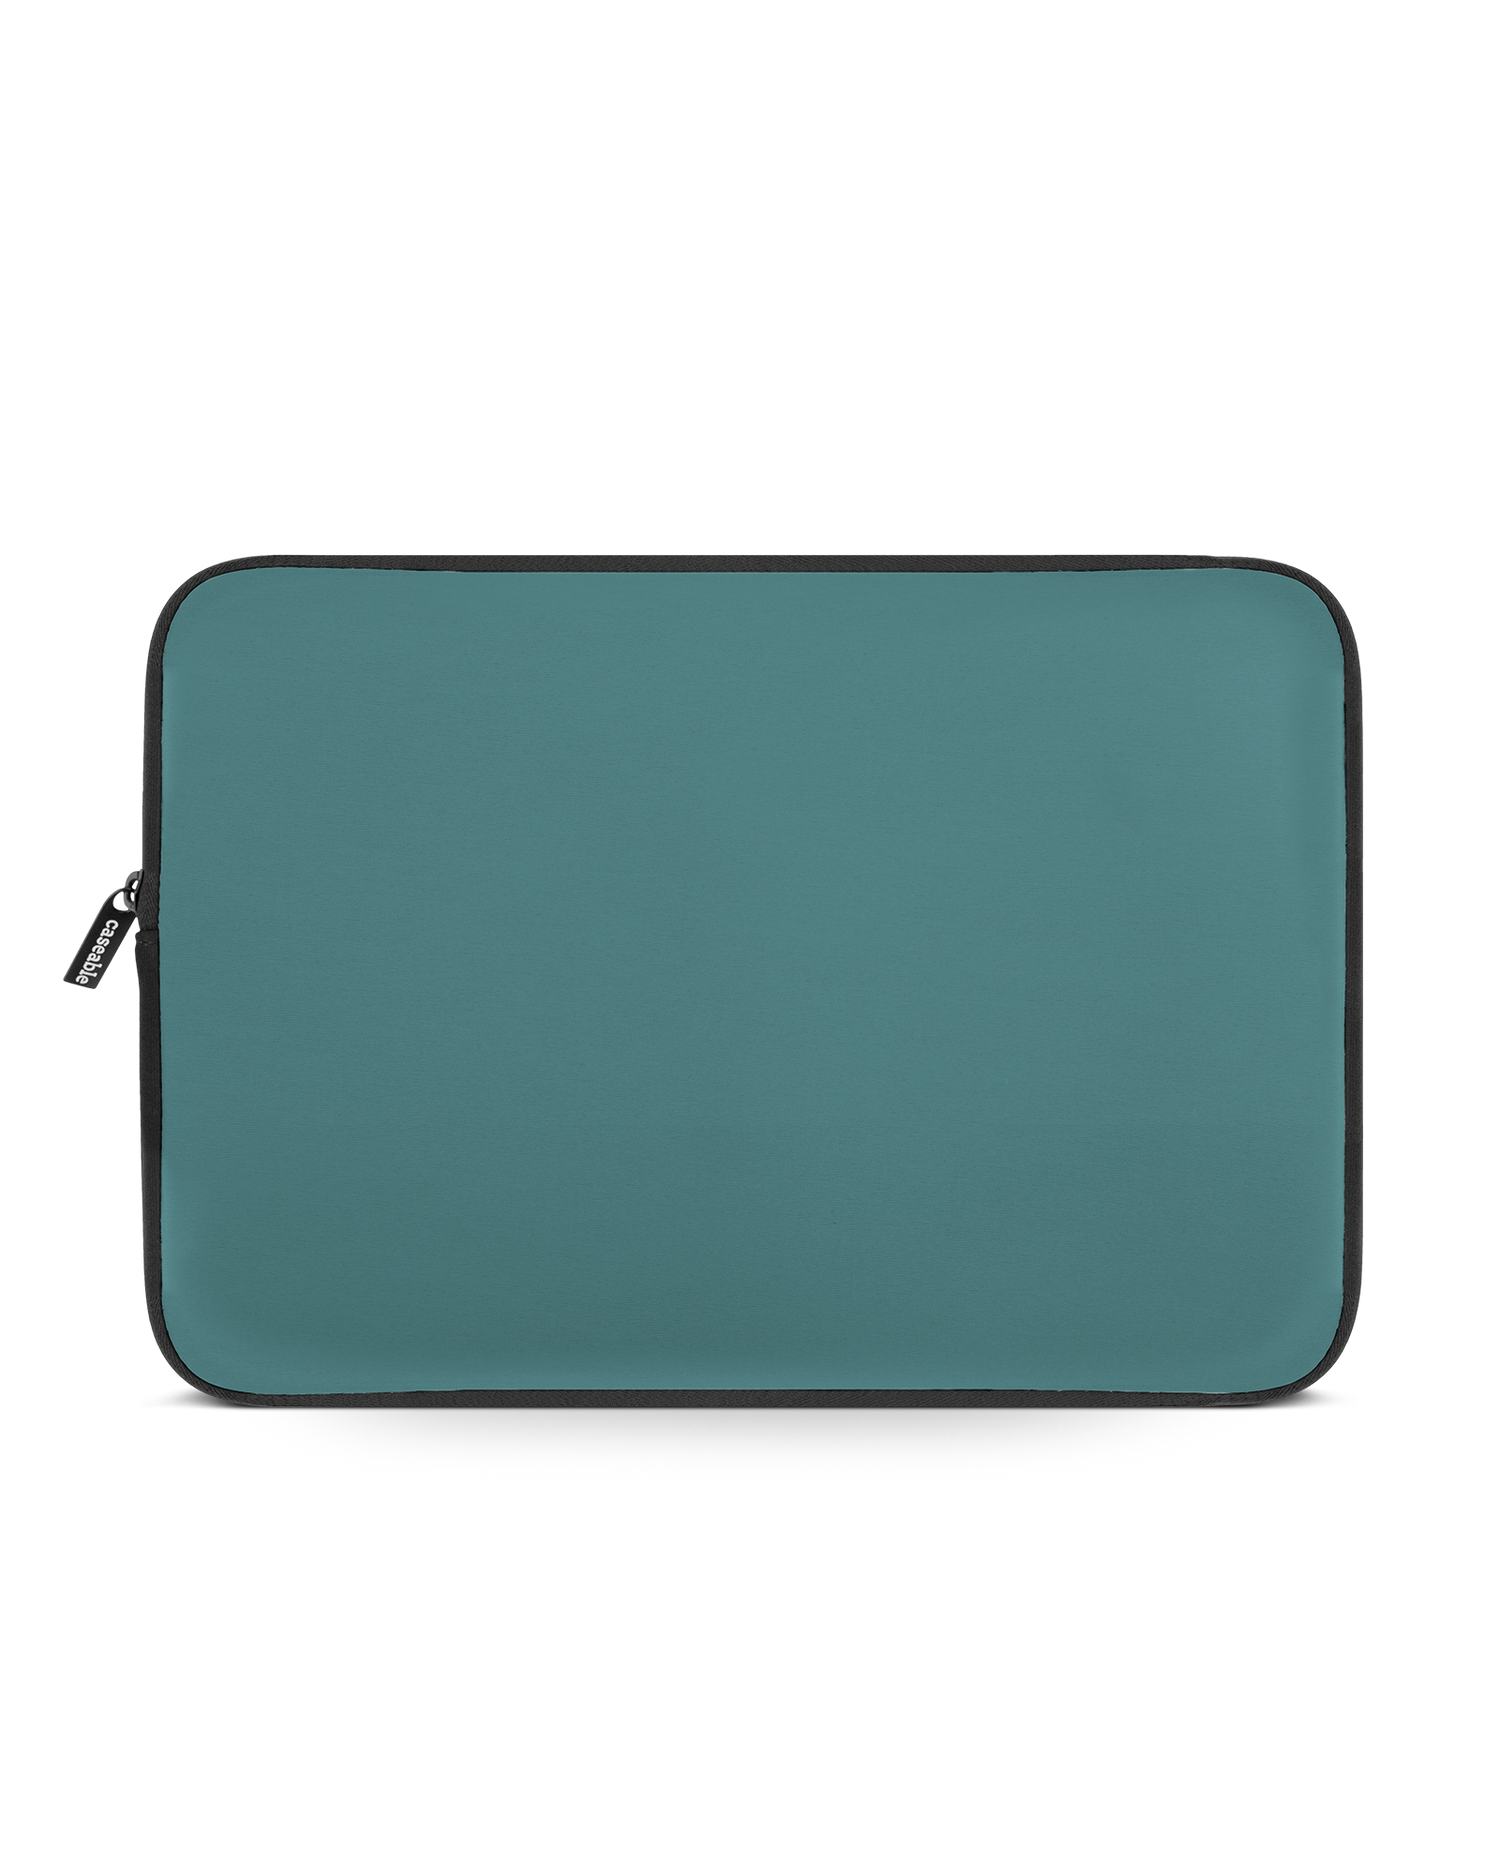 TURQUOISE Laptop Case 14 inch: Front View